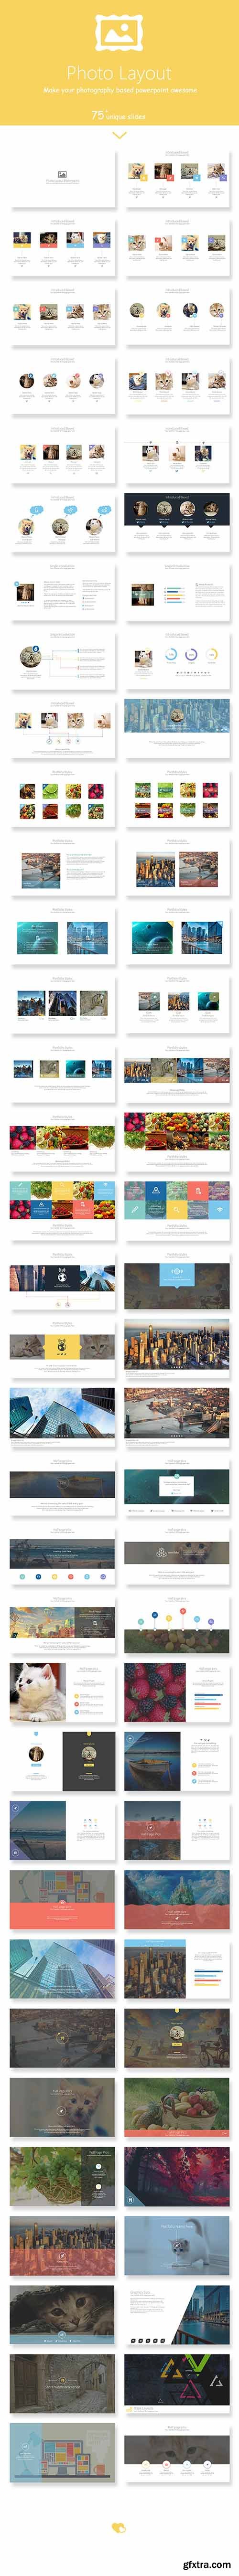 Graphicriver - Photo Layout Powerpoint Presentation Template 12351973